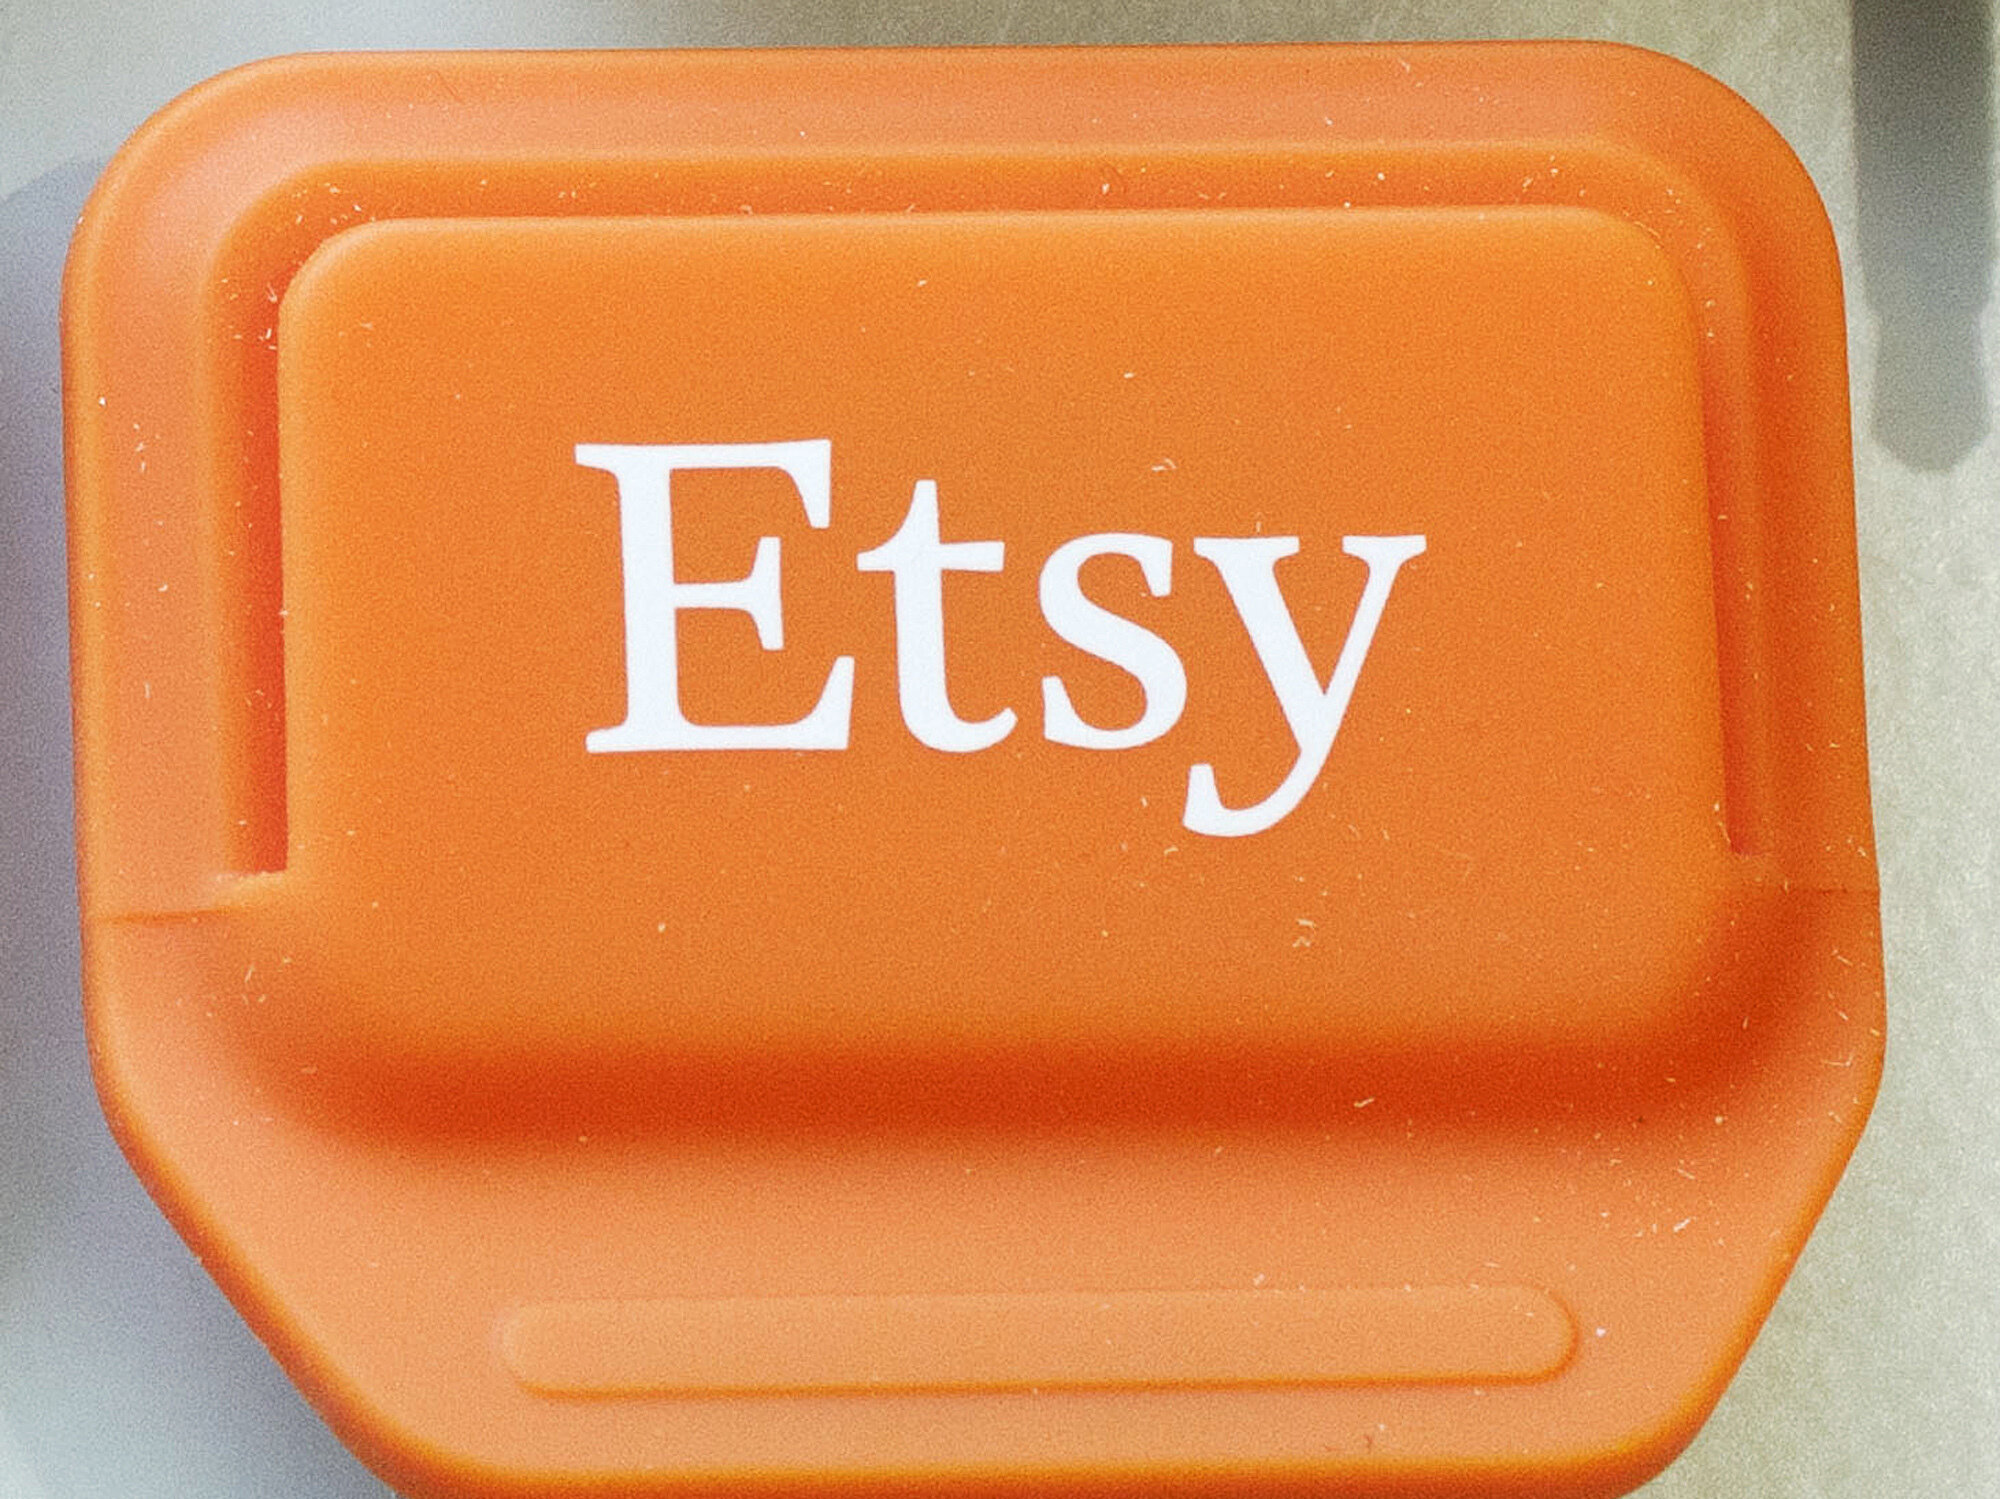 Etsy sellers protest fees by halting their sales for a week